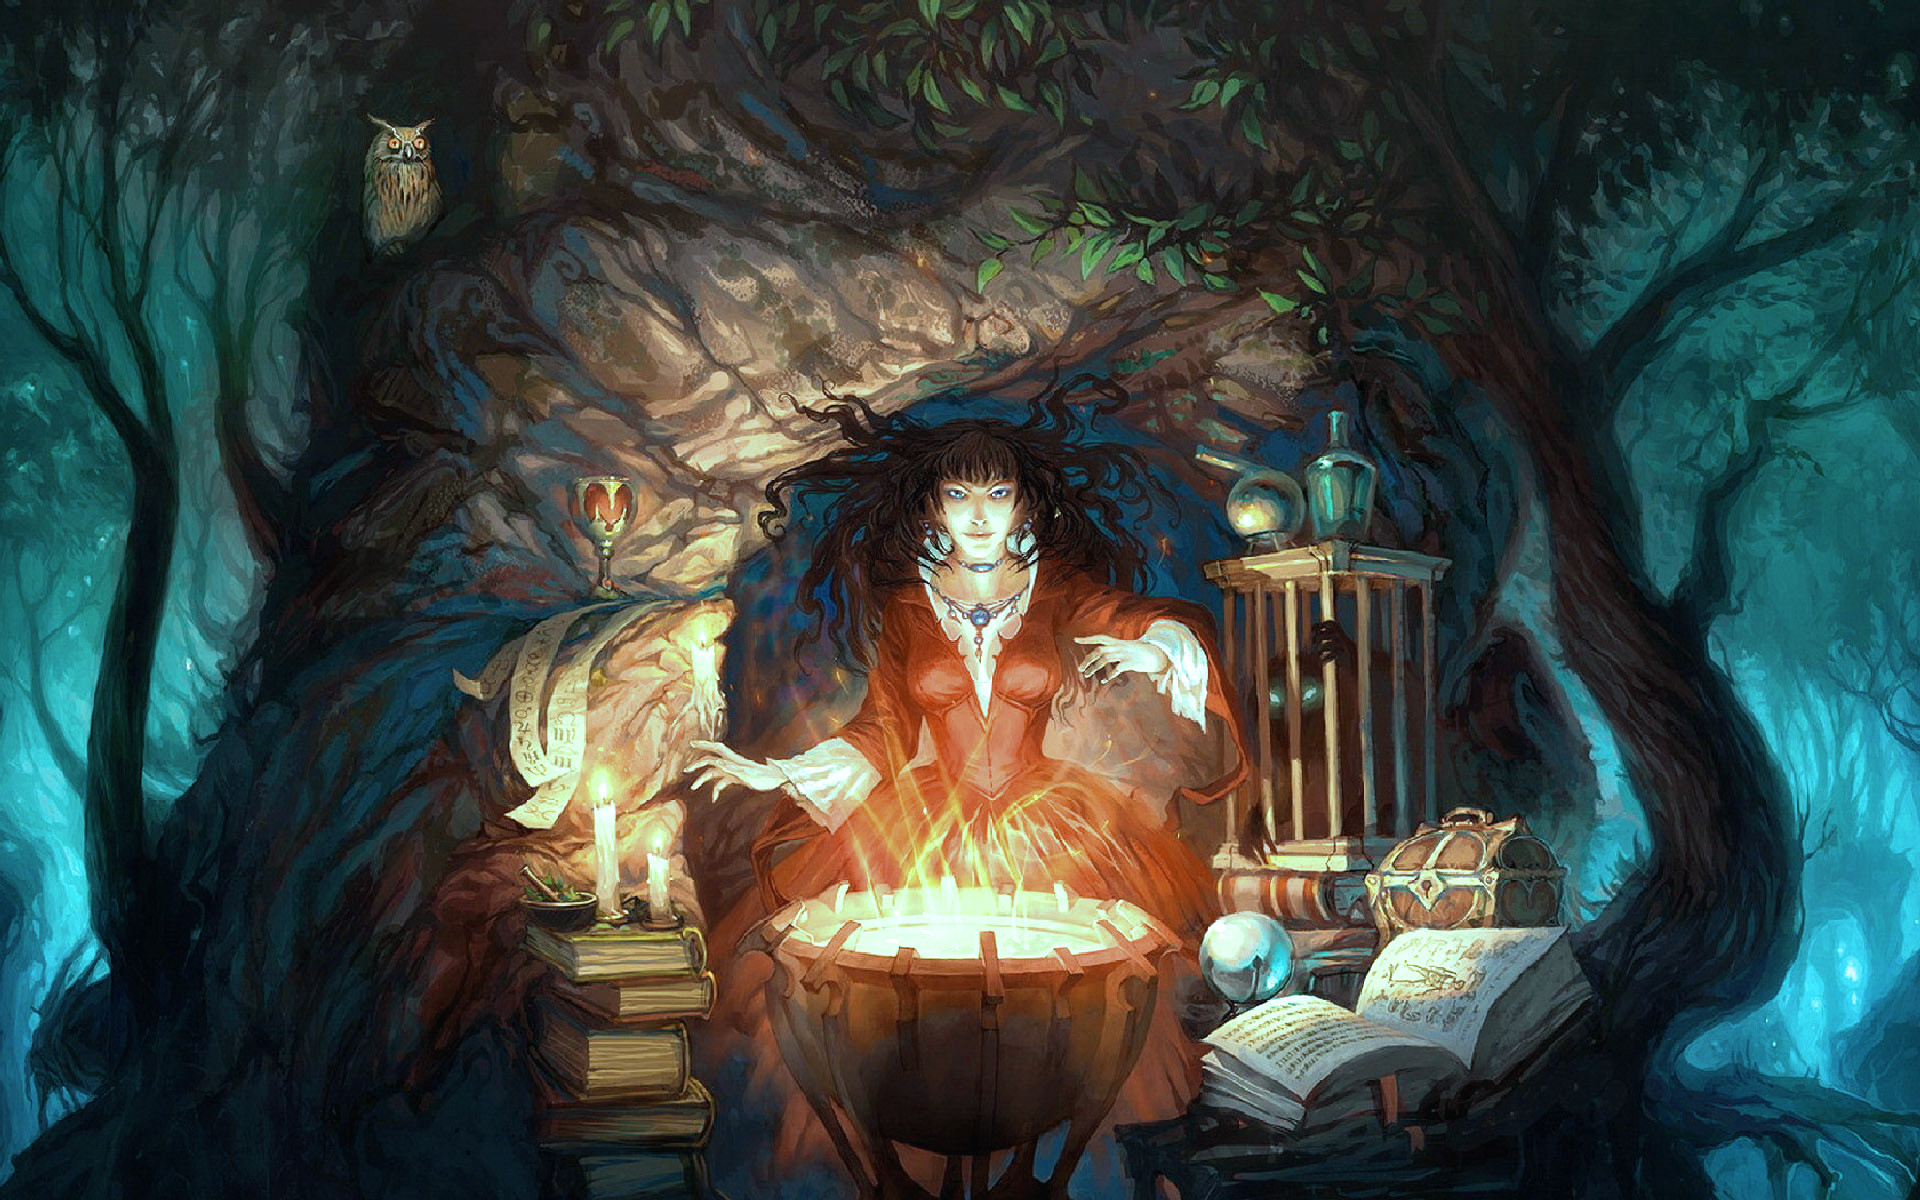 1920x1200 witch_occult_wiccan_wicca_cauldron_fire_flames_magic_book_spell_book_trees_forest_cg_digital_art_artistic_forest_detail_dark_halloween_fantasy_